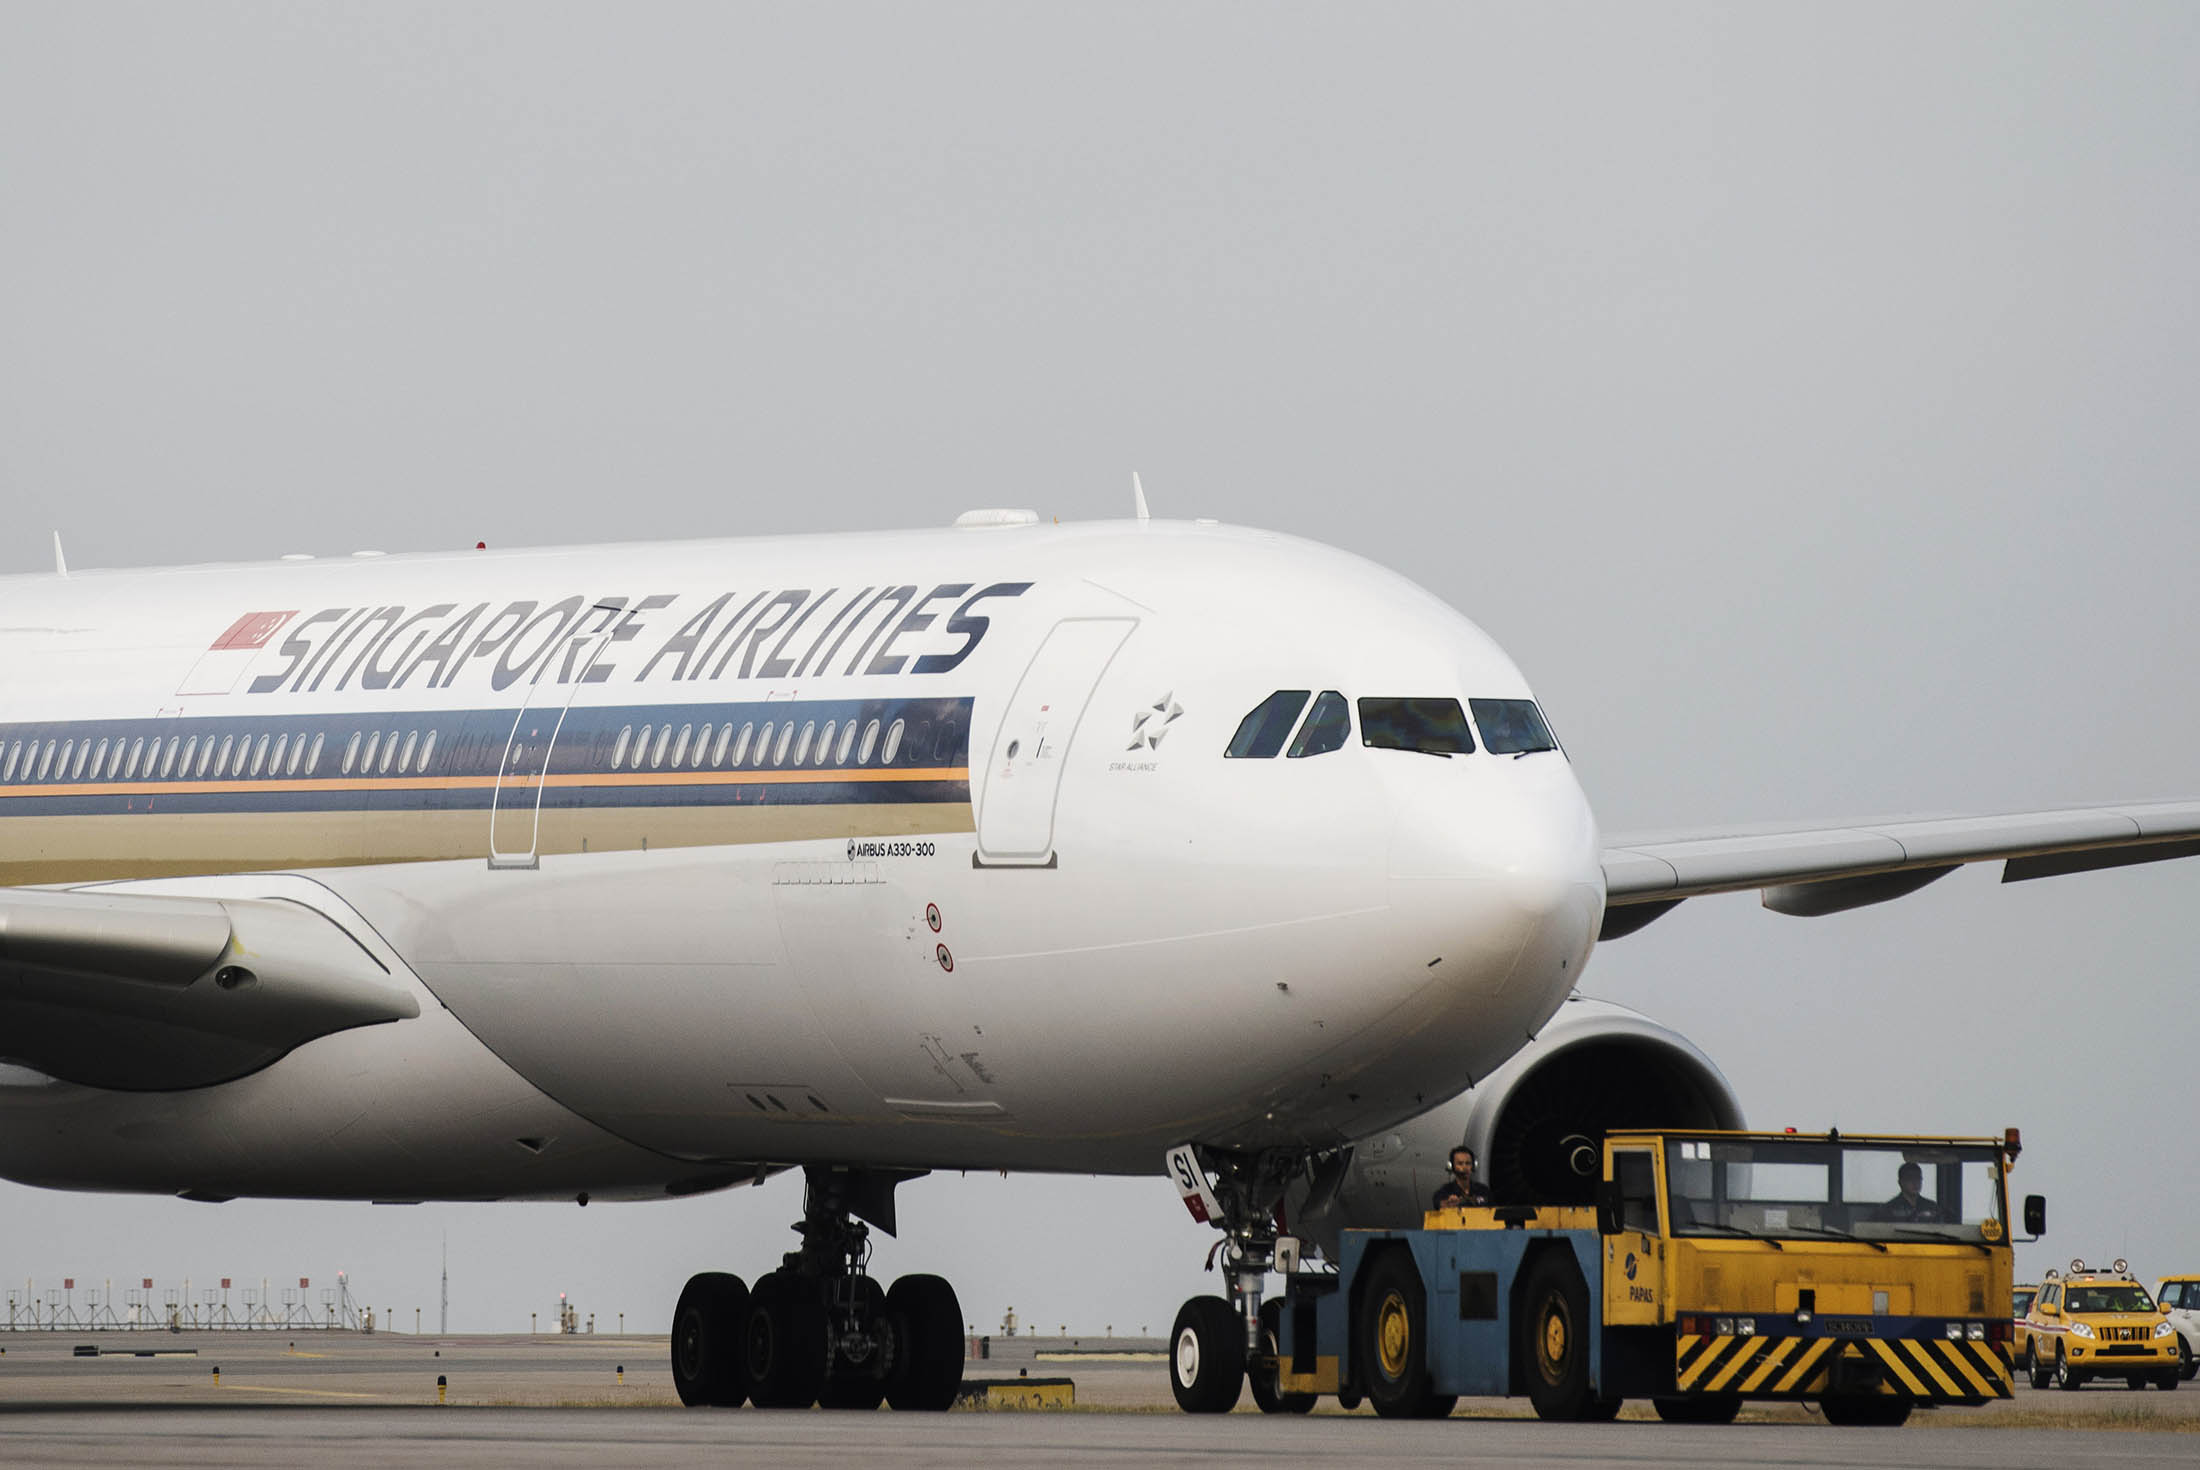 A Singapore Airlines Ltd. Airbus SAS A330-300 aircraft taxies at Hong Kong International Airport in Hong Kong, China, on Sunday, Nov. 15, 2015. The Hong Kong government in March approved a third runway at the city's international airport that would help Hong Kong compete with regional rivals seeking to benefit from growing passenger traffic and cargo demand in Asia, particularly China.
